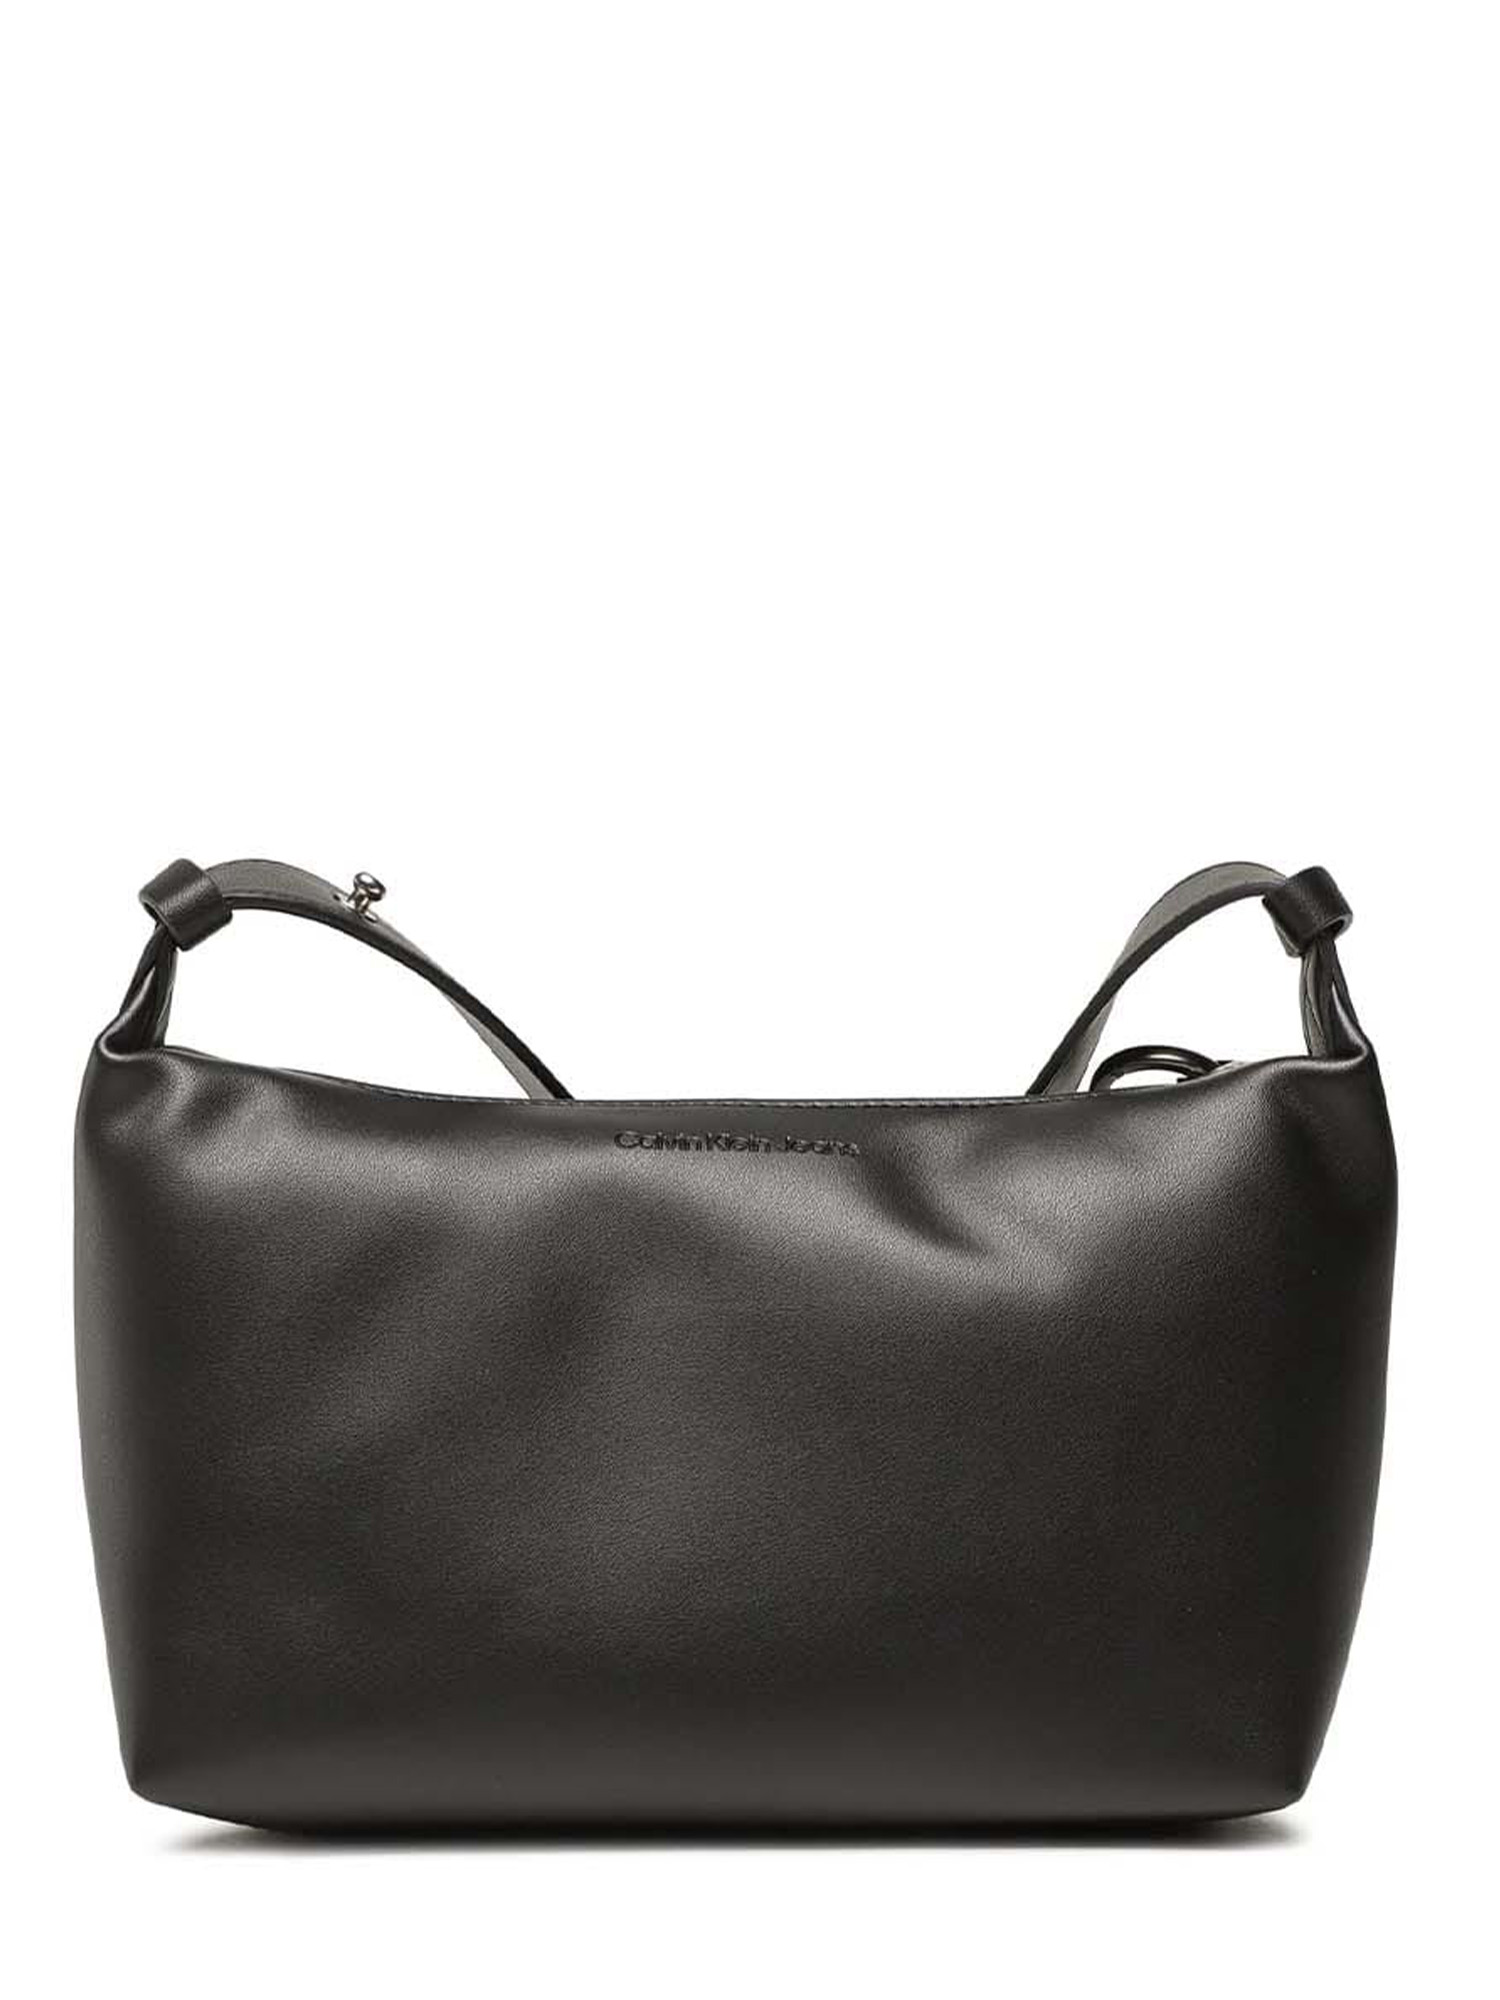 CK ROUNDED BAG - NERO